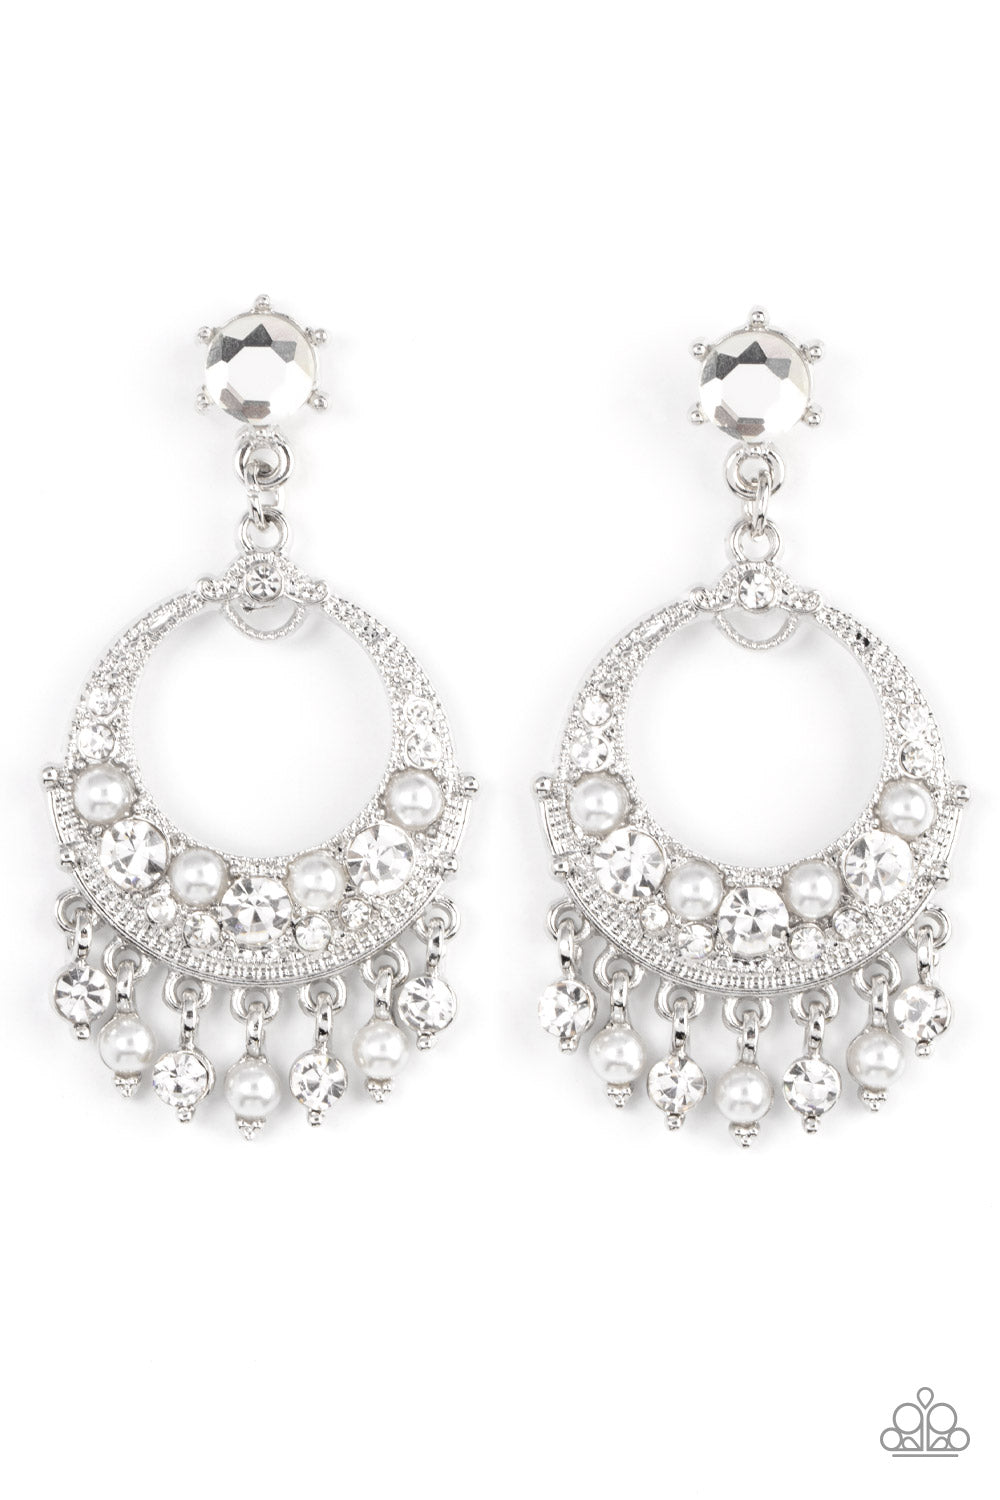 Marrakesh Request White Post Earring - Paparazzi Accessories  White pearl and white rhinestone dotted frames dance from the bottom of an ornate silver hoop encrusted in matching bubbly accents, resulting in a timeless fringe at the bottom of a solitaire white rhinestone. Earring attaches to a standard fishhook fitting.  Sold as one pair of post earrings.